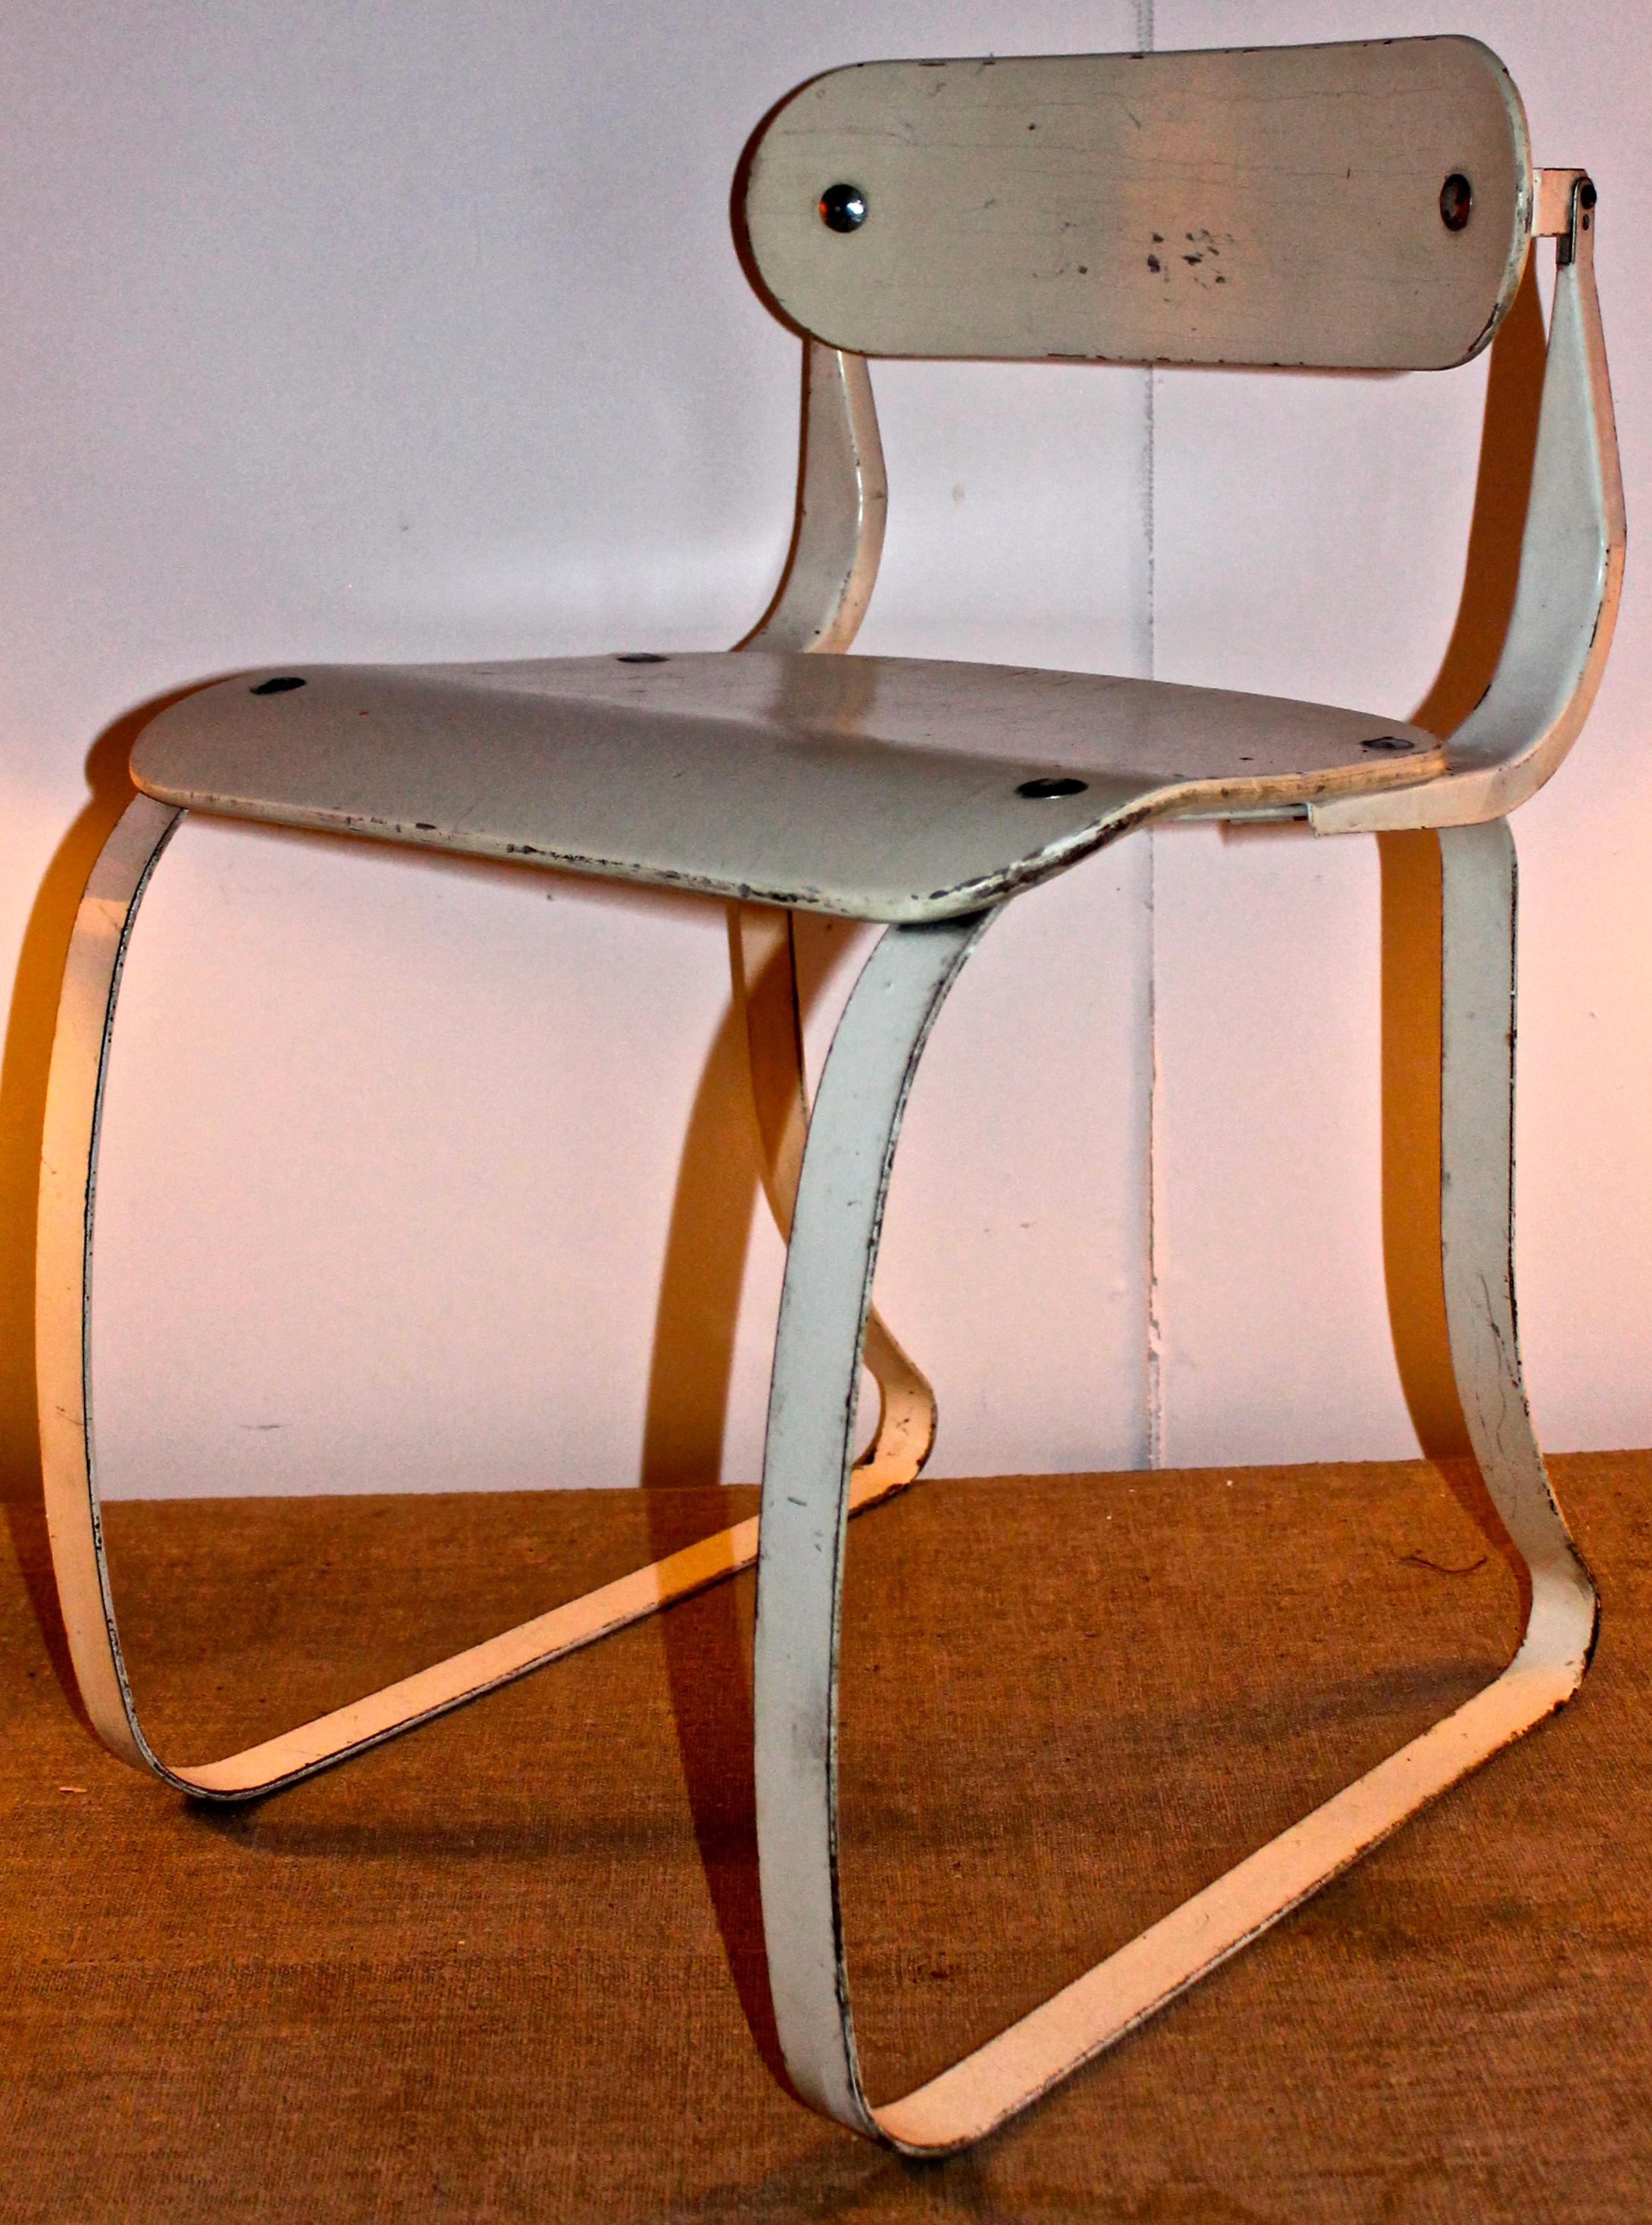 Important American modernist work chair designed for use with an ironing machine. Painted steel and lacquered plywood. This chair came to the attention of the design world when it was added to the permanent collection of the Museum of Modern Art